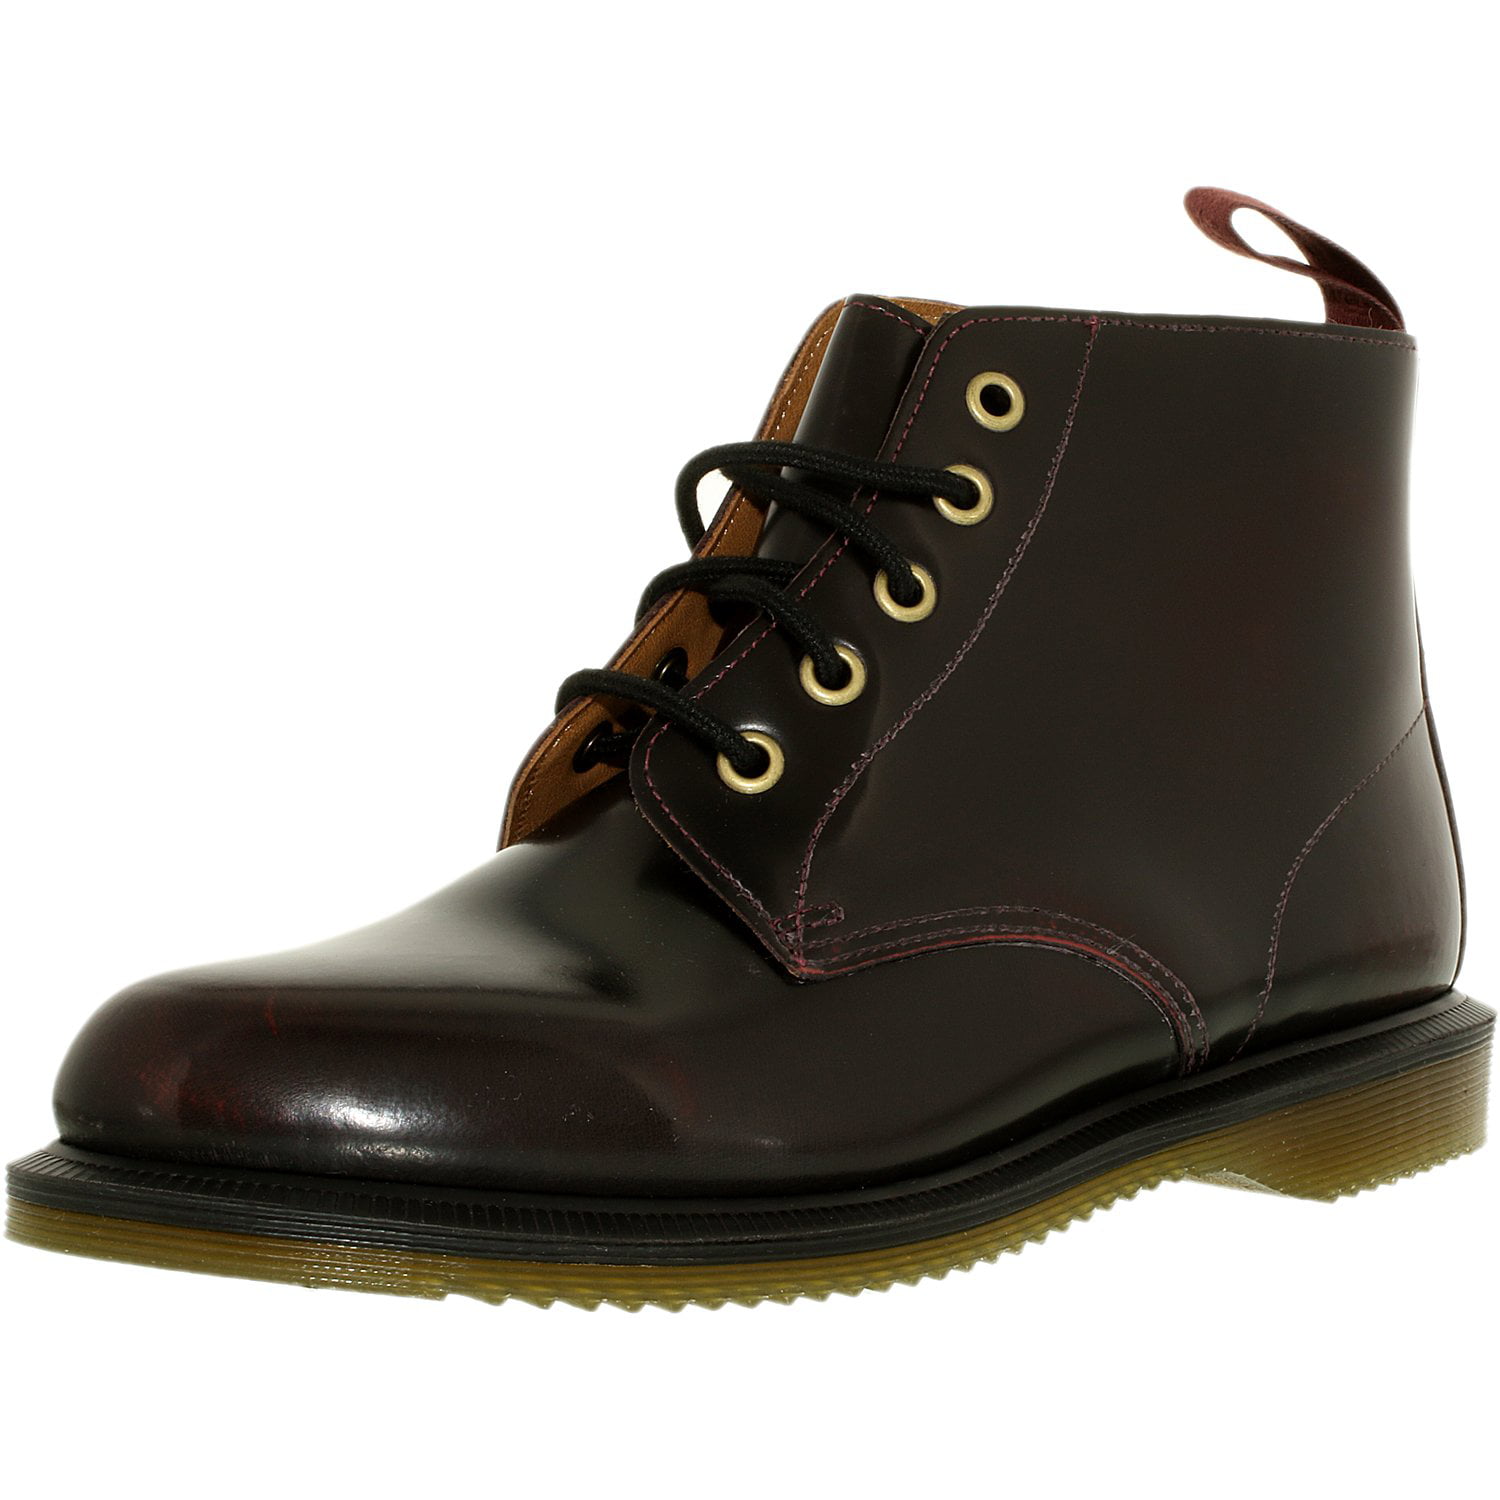 Dr. Martens Women's Emmeline 5-Eye Leather Cherry Red Rogue High-Top ...